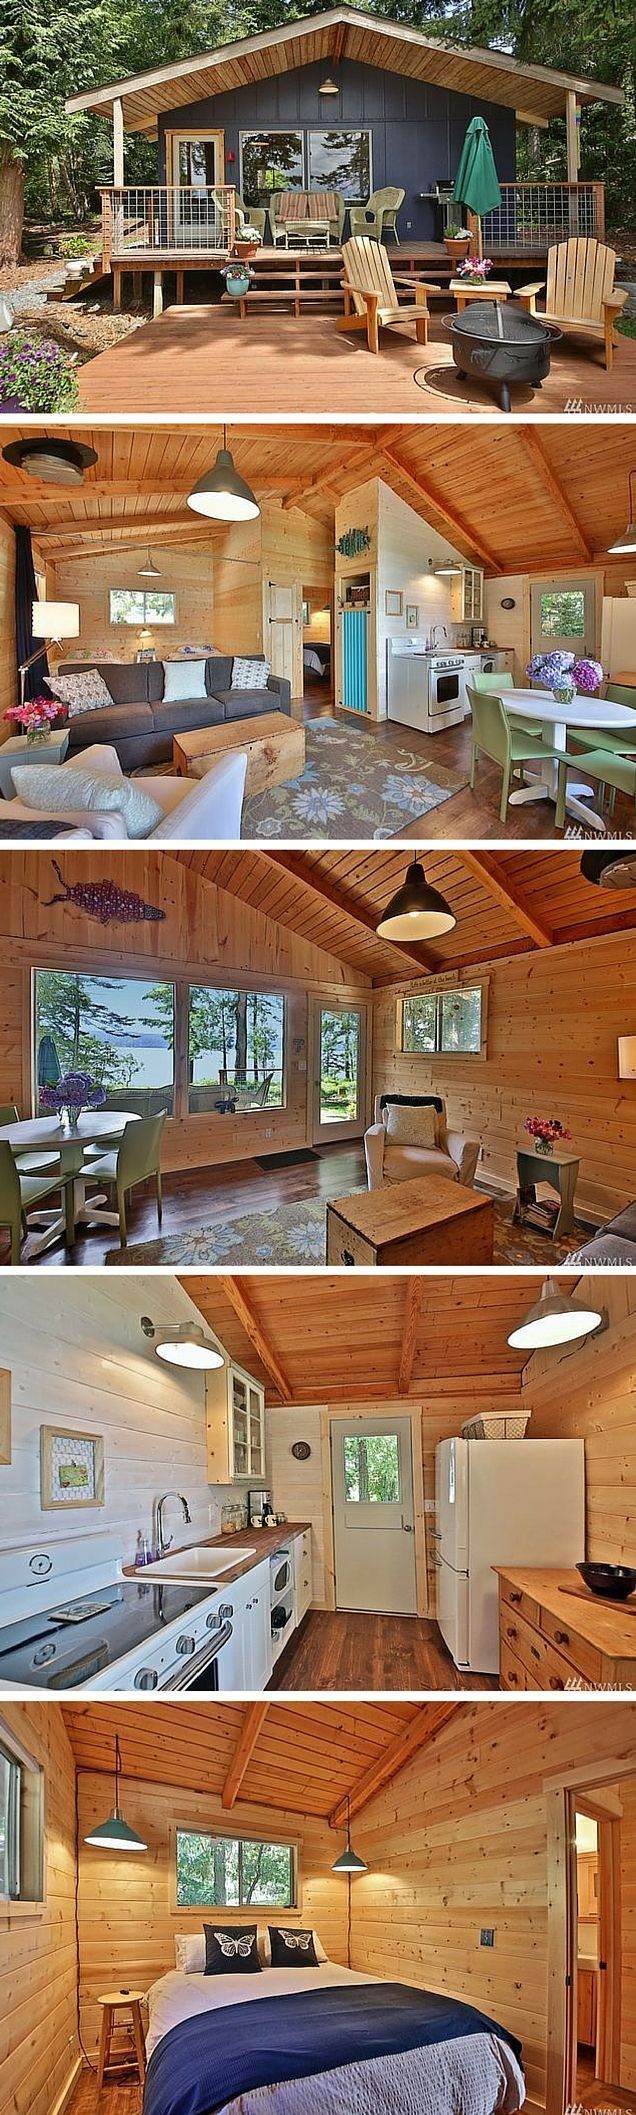 awesome A 528 sq ft cabin in Langley, Washington… by www.top10-home-de…